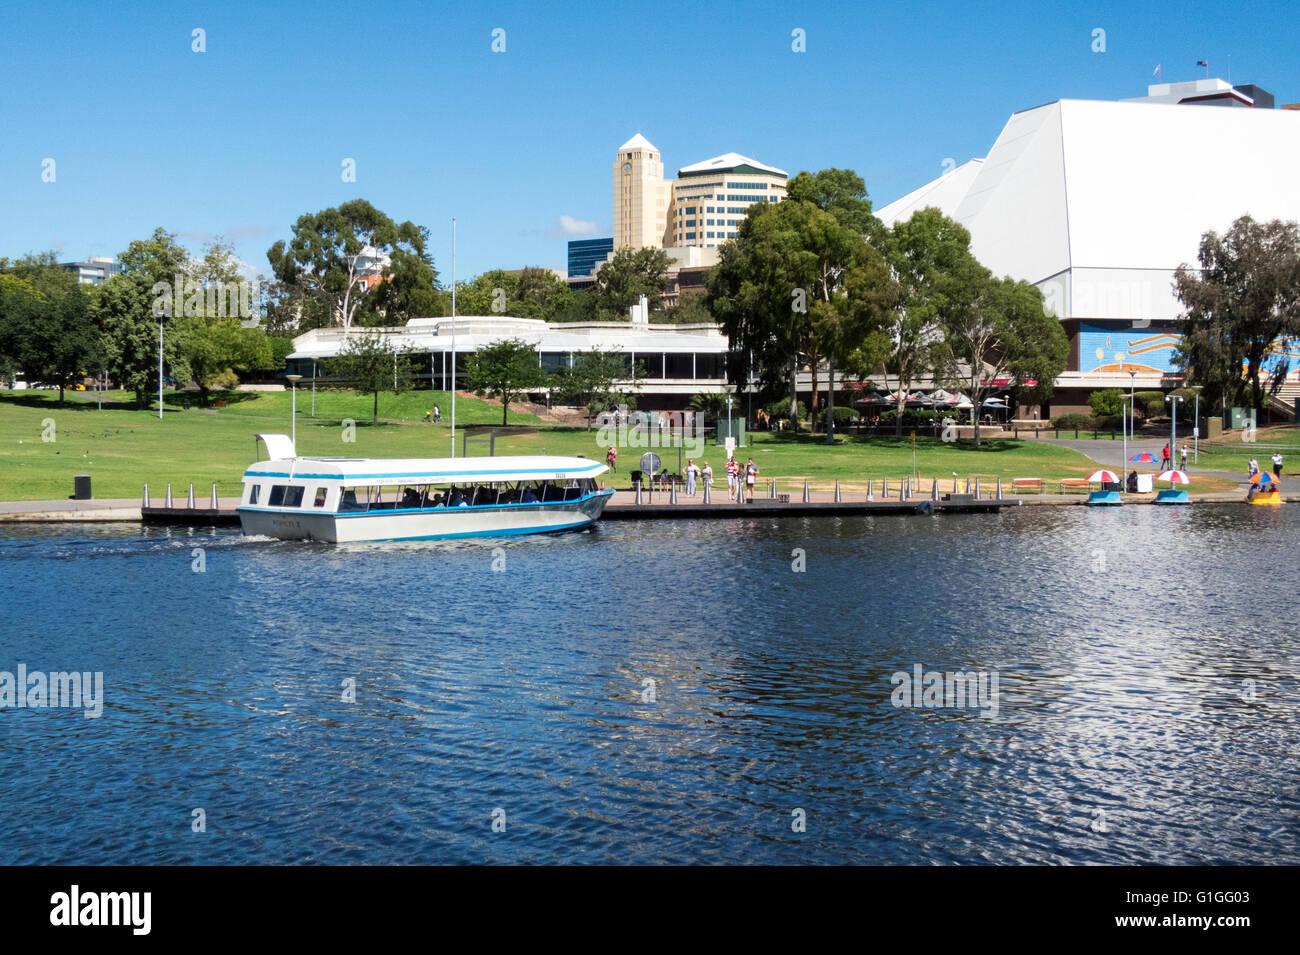 The Festival Theatre complex overlooking the River Torrens in Adelaide Australia. The tourist boat 'Popeye' is sailing past. Stock Photo